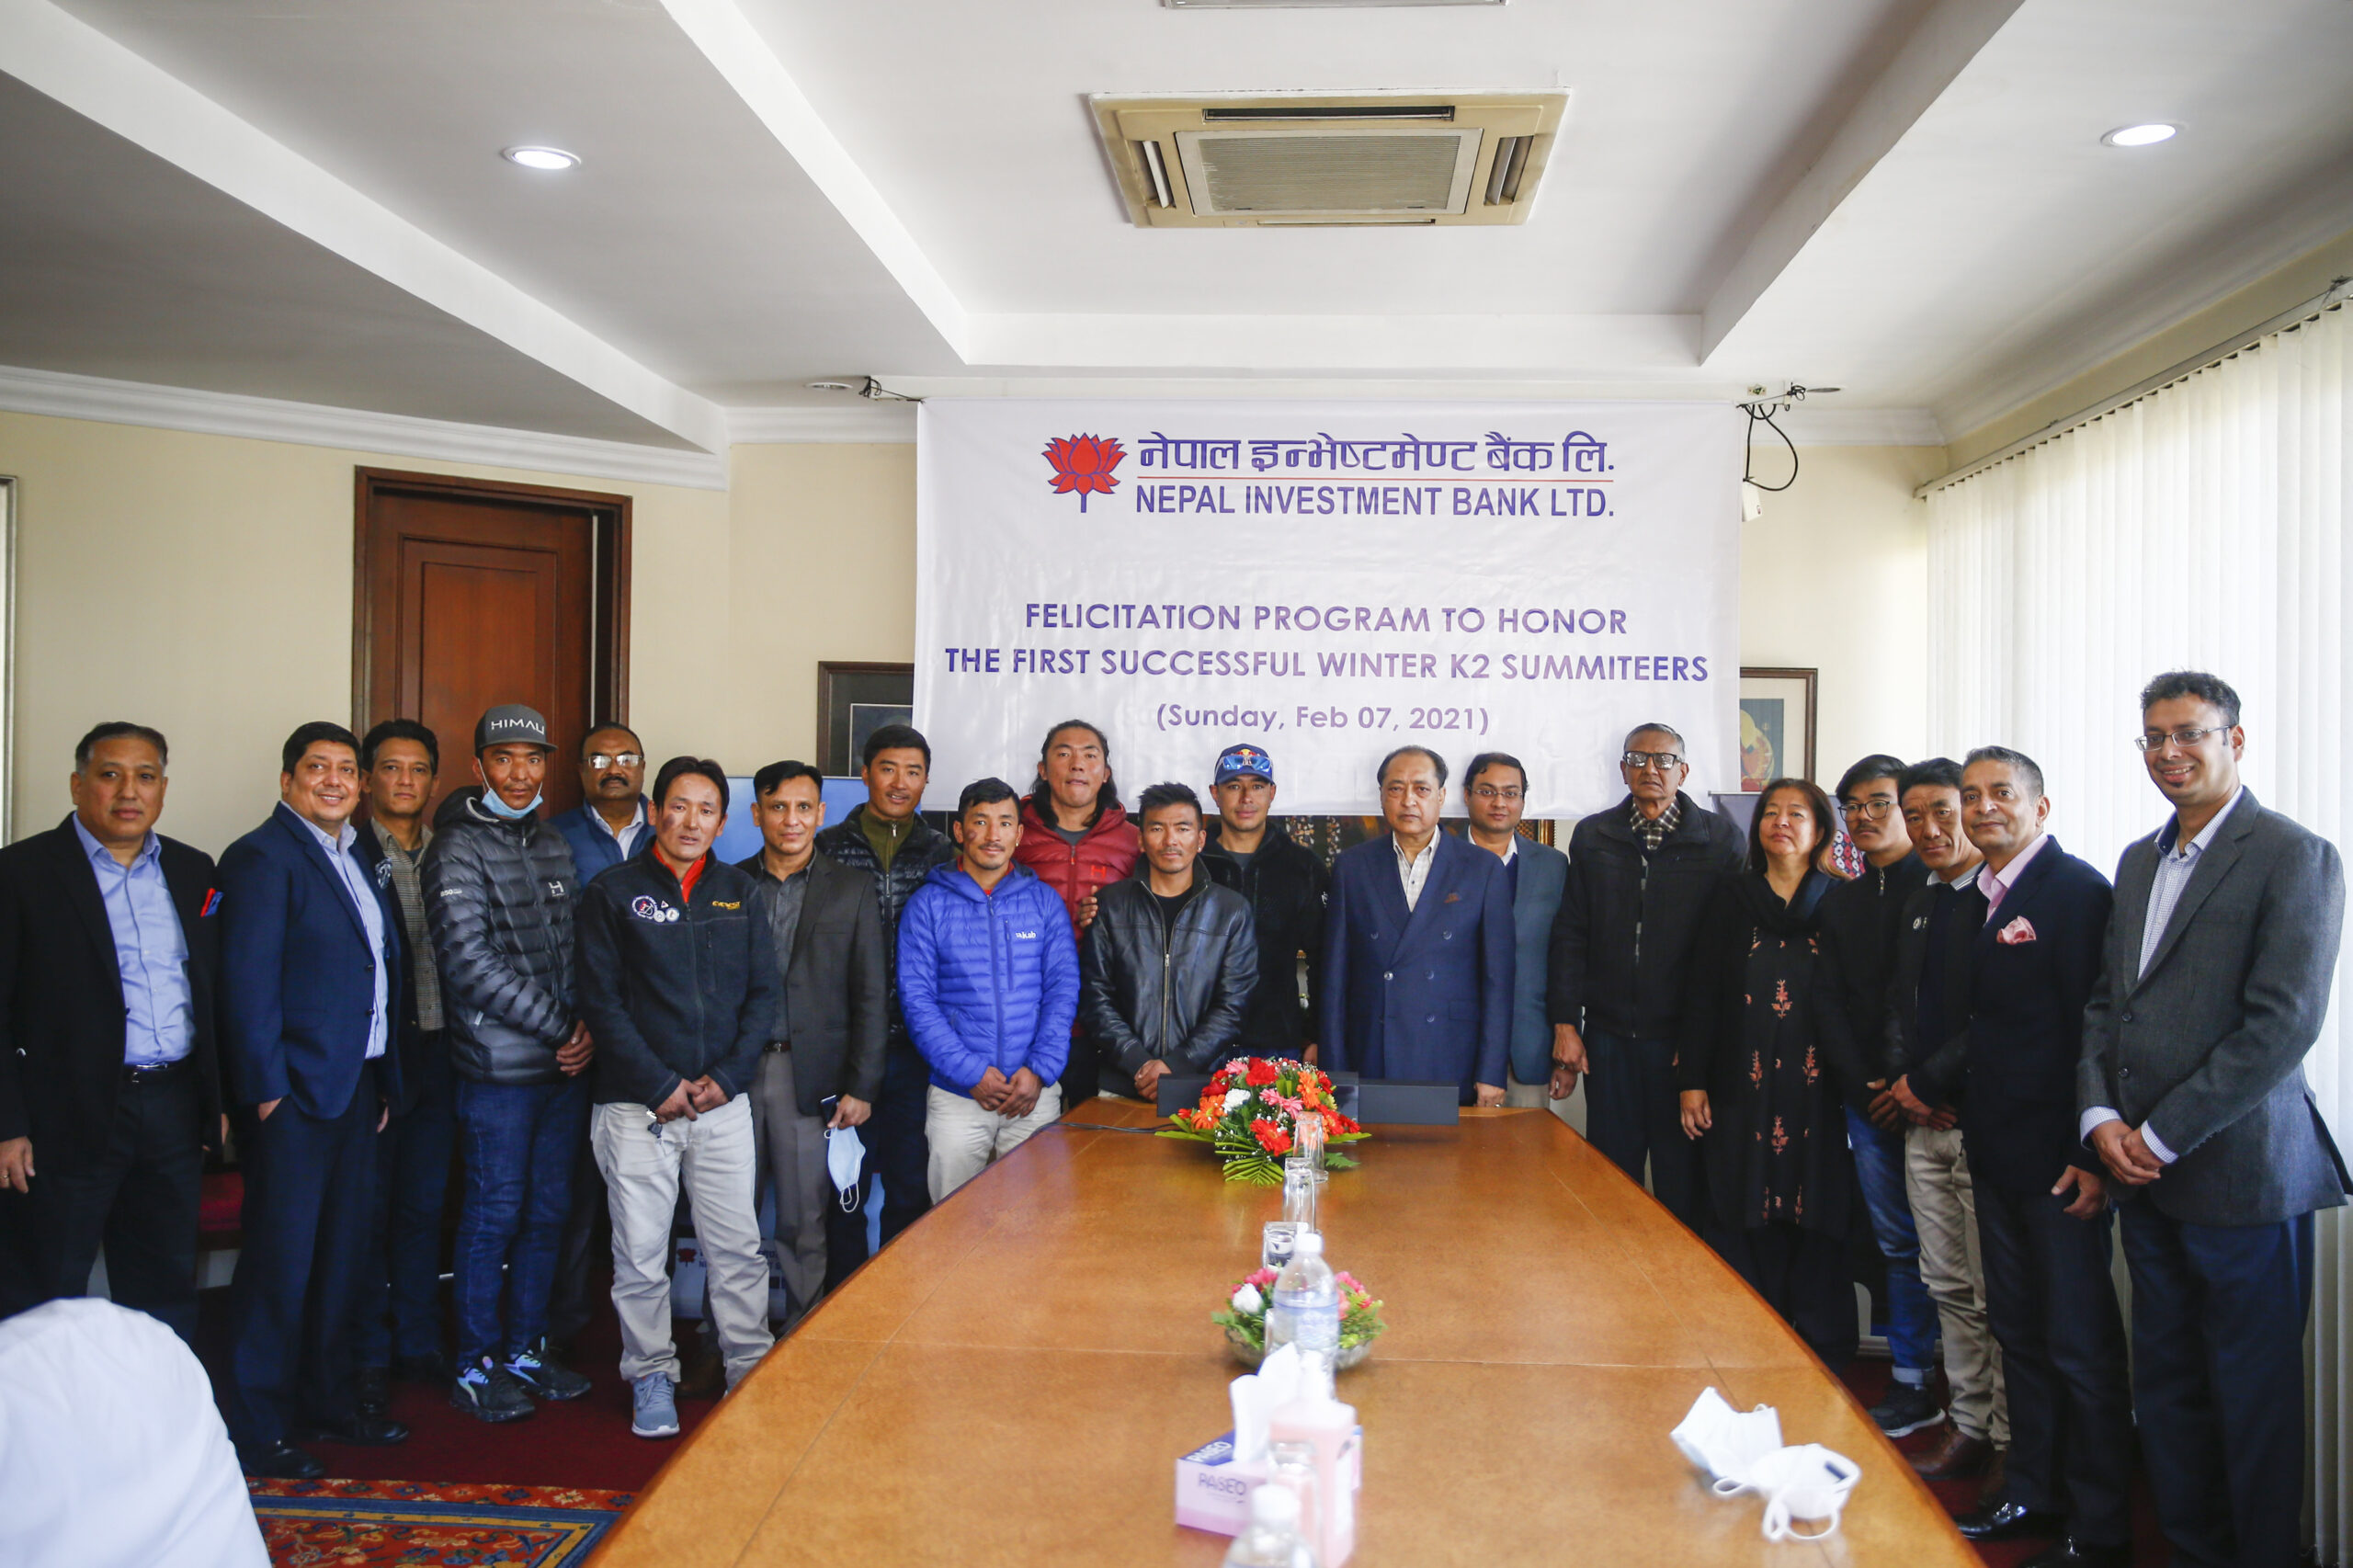 Investment Bank awards Rs 1 million to Ketu Himal climbers